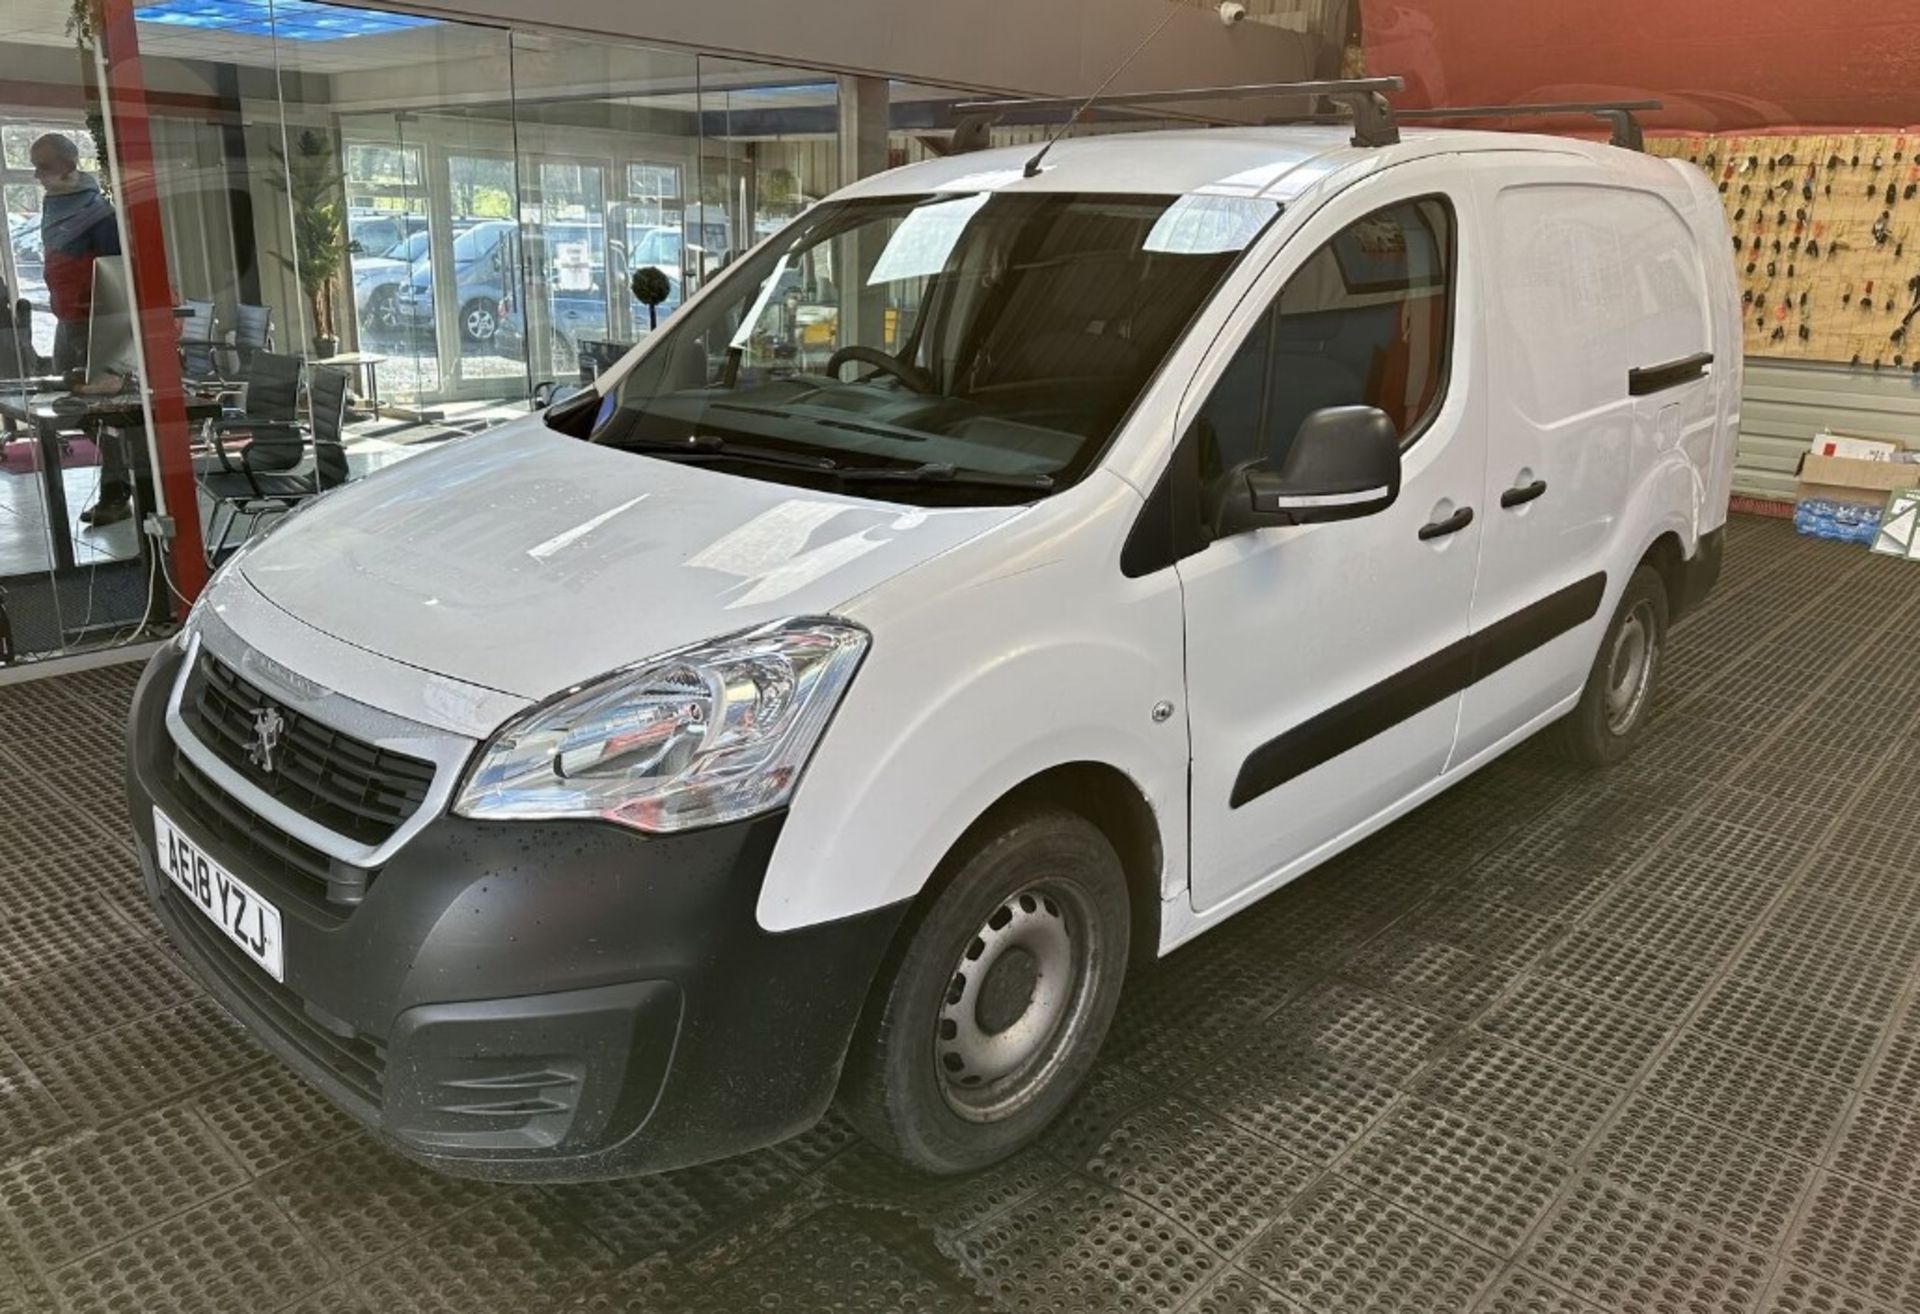 PEUGEOT PARTNER BERLINGO L2: SPACIOUS 5-SEATER CREW, ULEZ COMPLIANT, FULLY SERVICED - Image 2 of 11